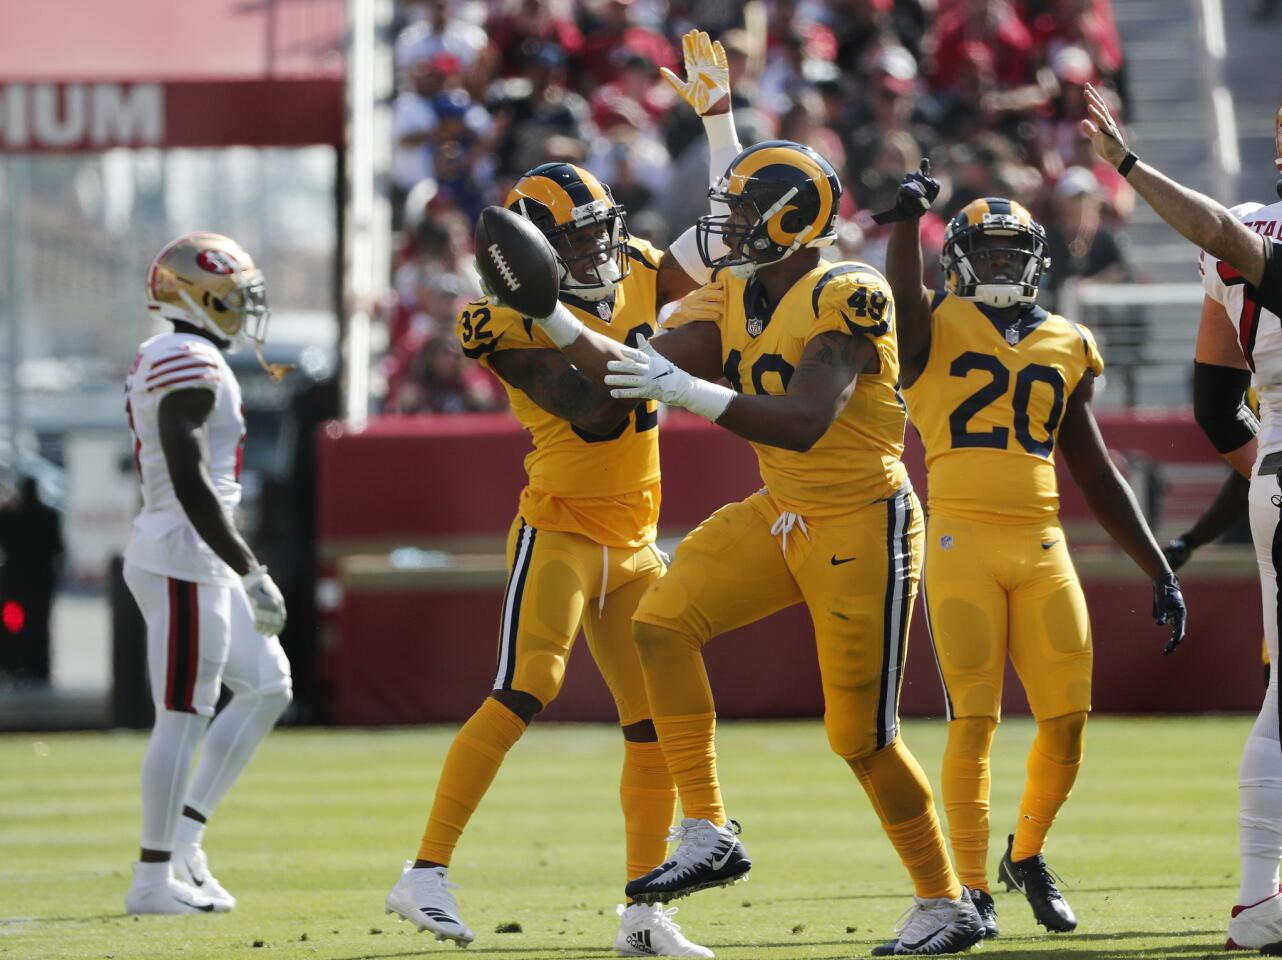 Rams linebacker Trevon Young (49) reacts with teammates Troy Hill (32) and Lamarcus Joyner (20) after intercepting a pass in the first half at Levi's Stadium on Sunday in Santa Clara.